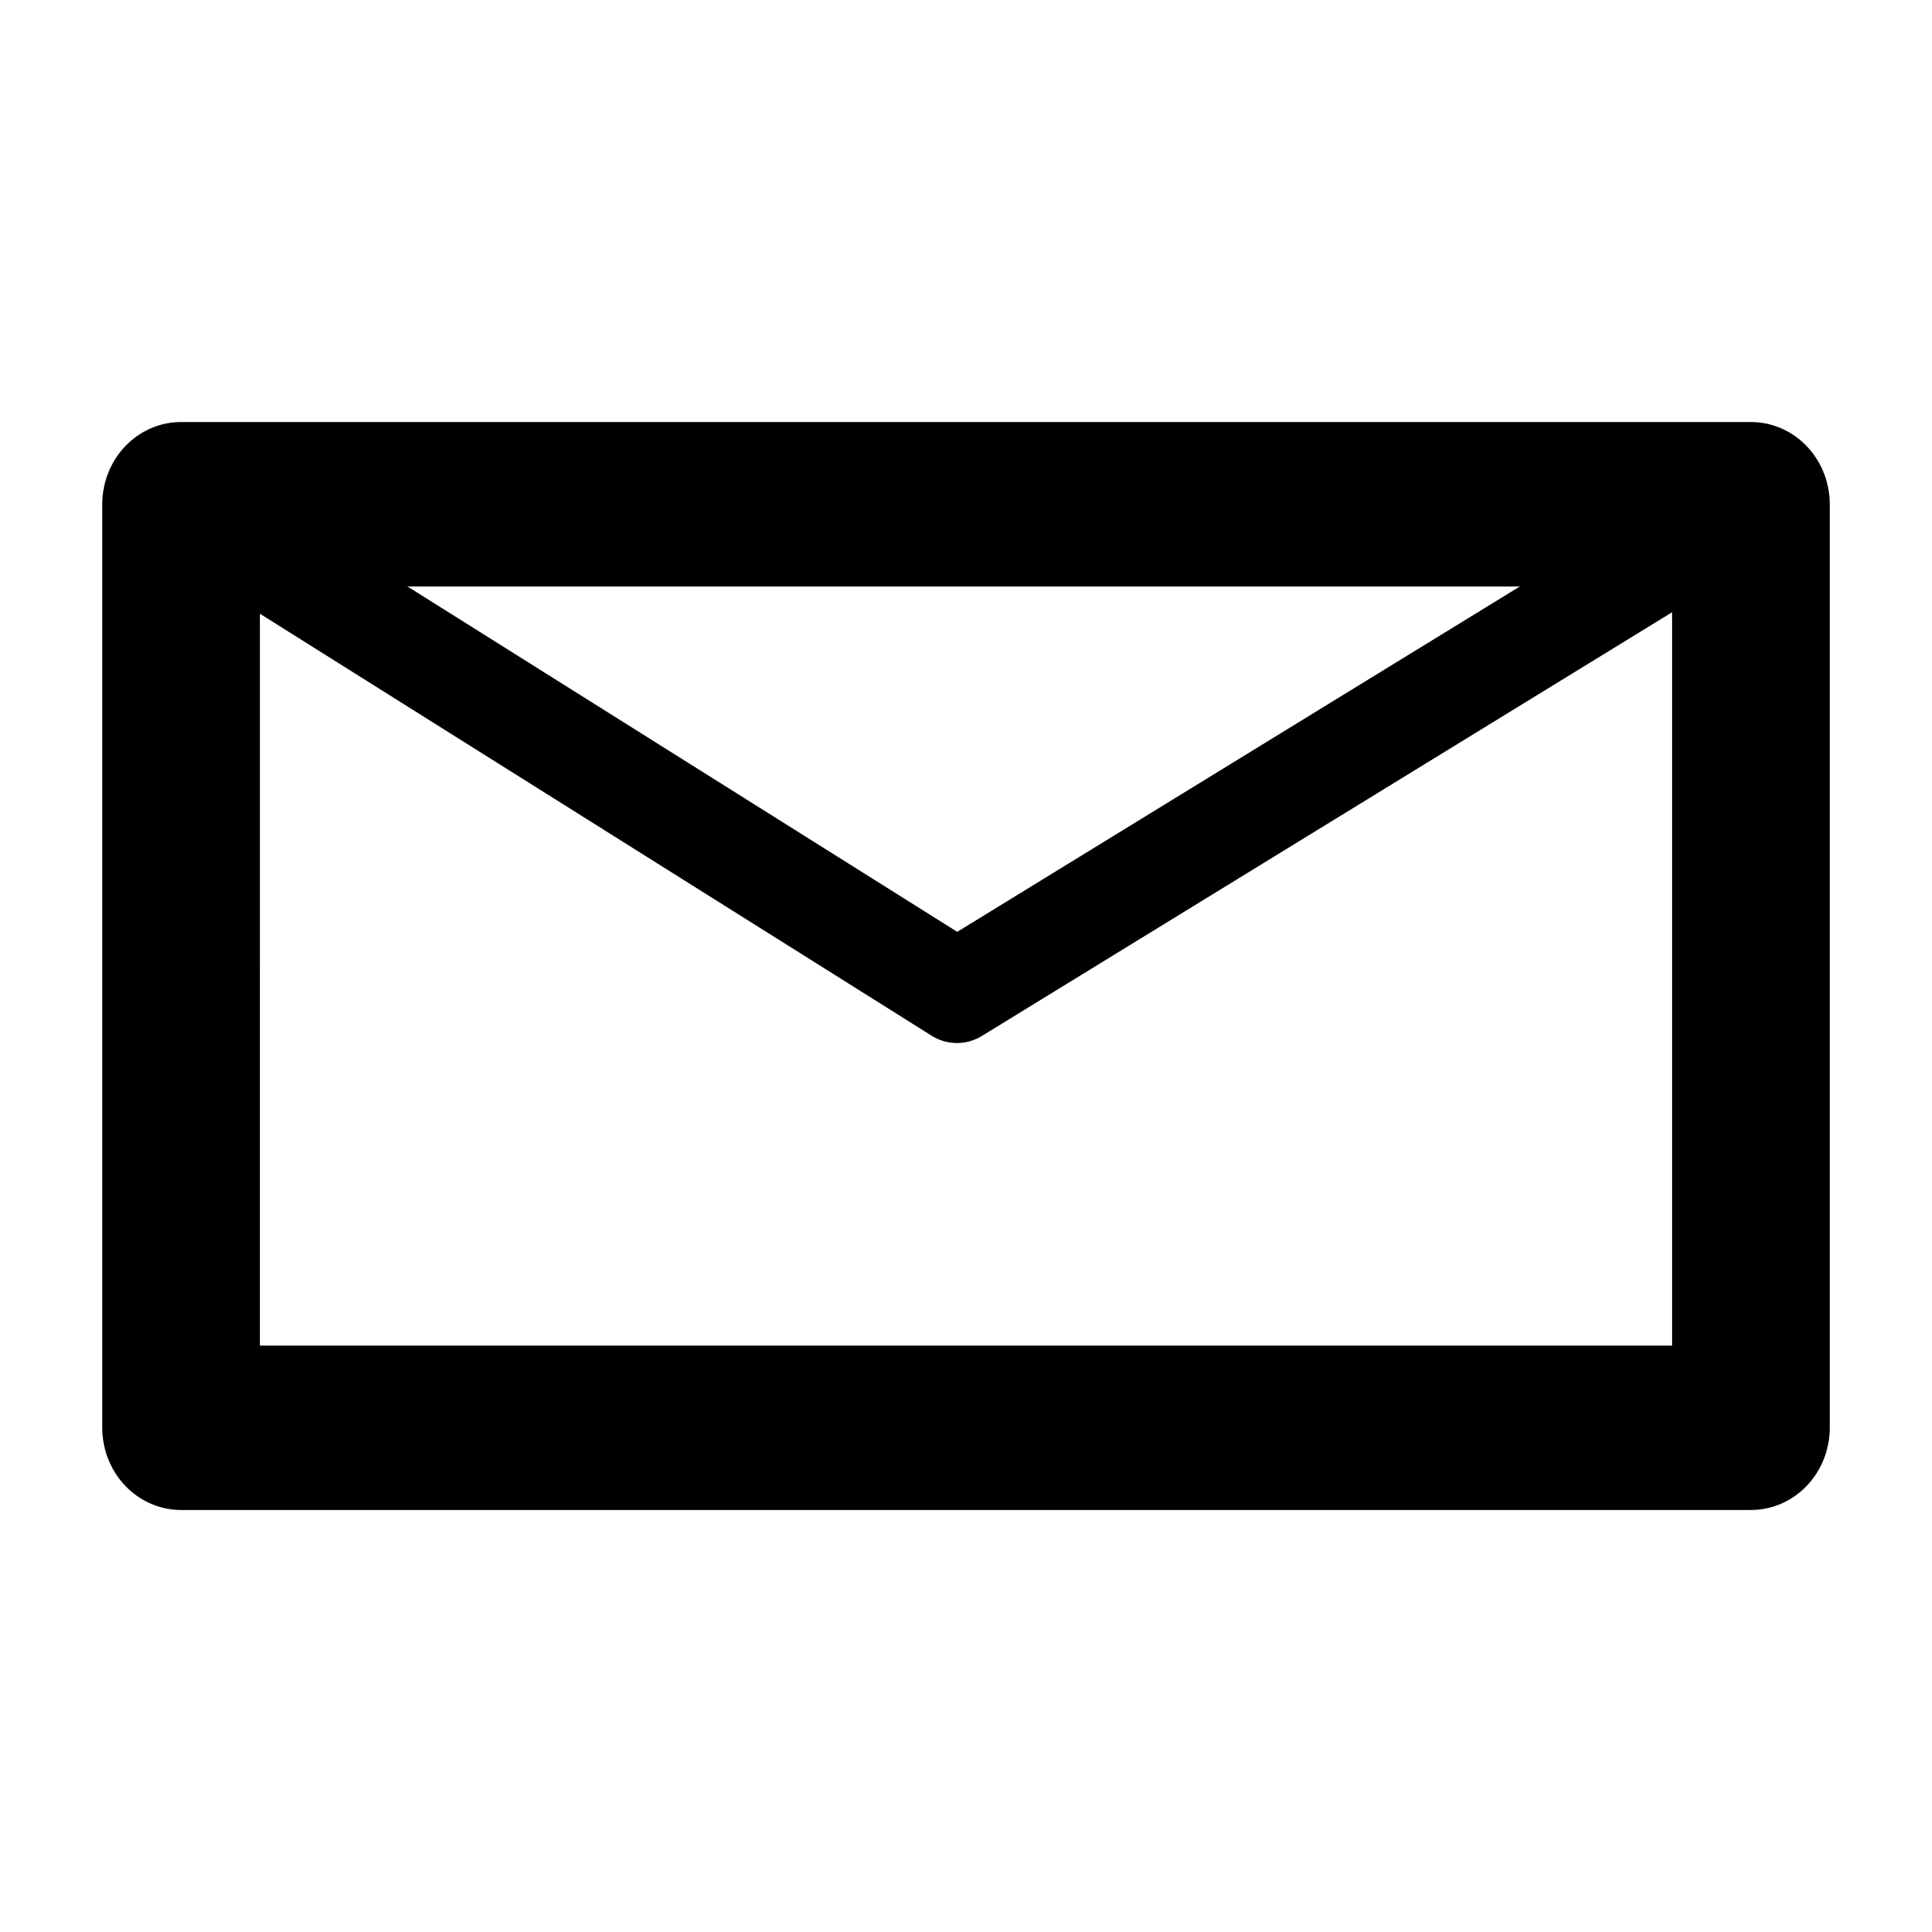 email icon transparent background png